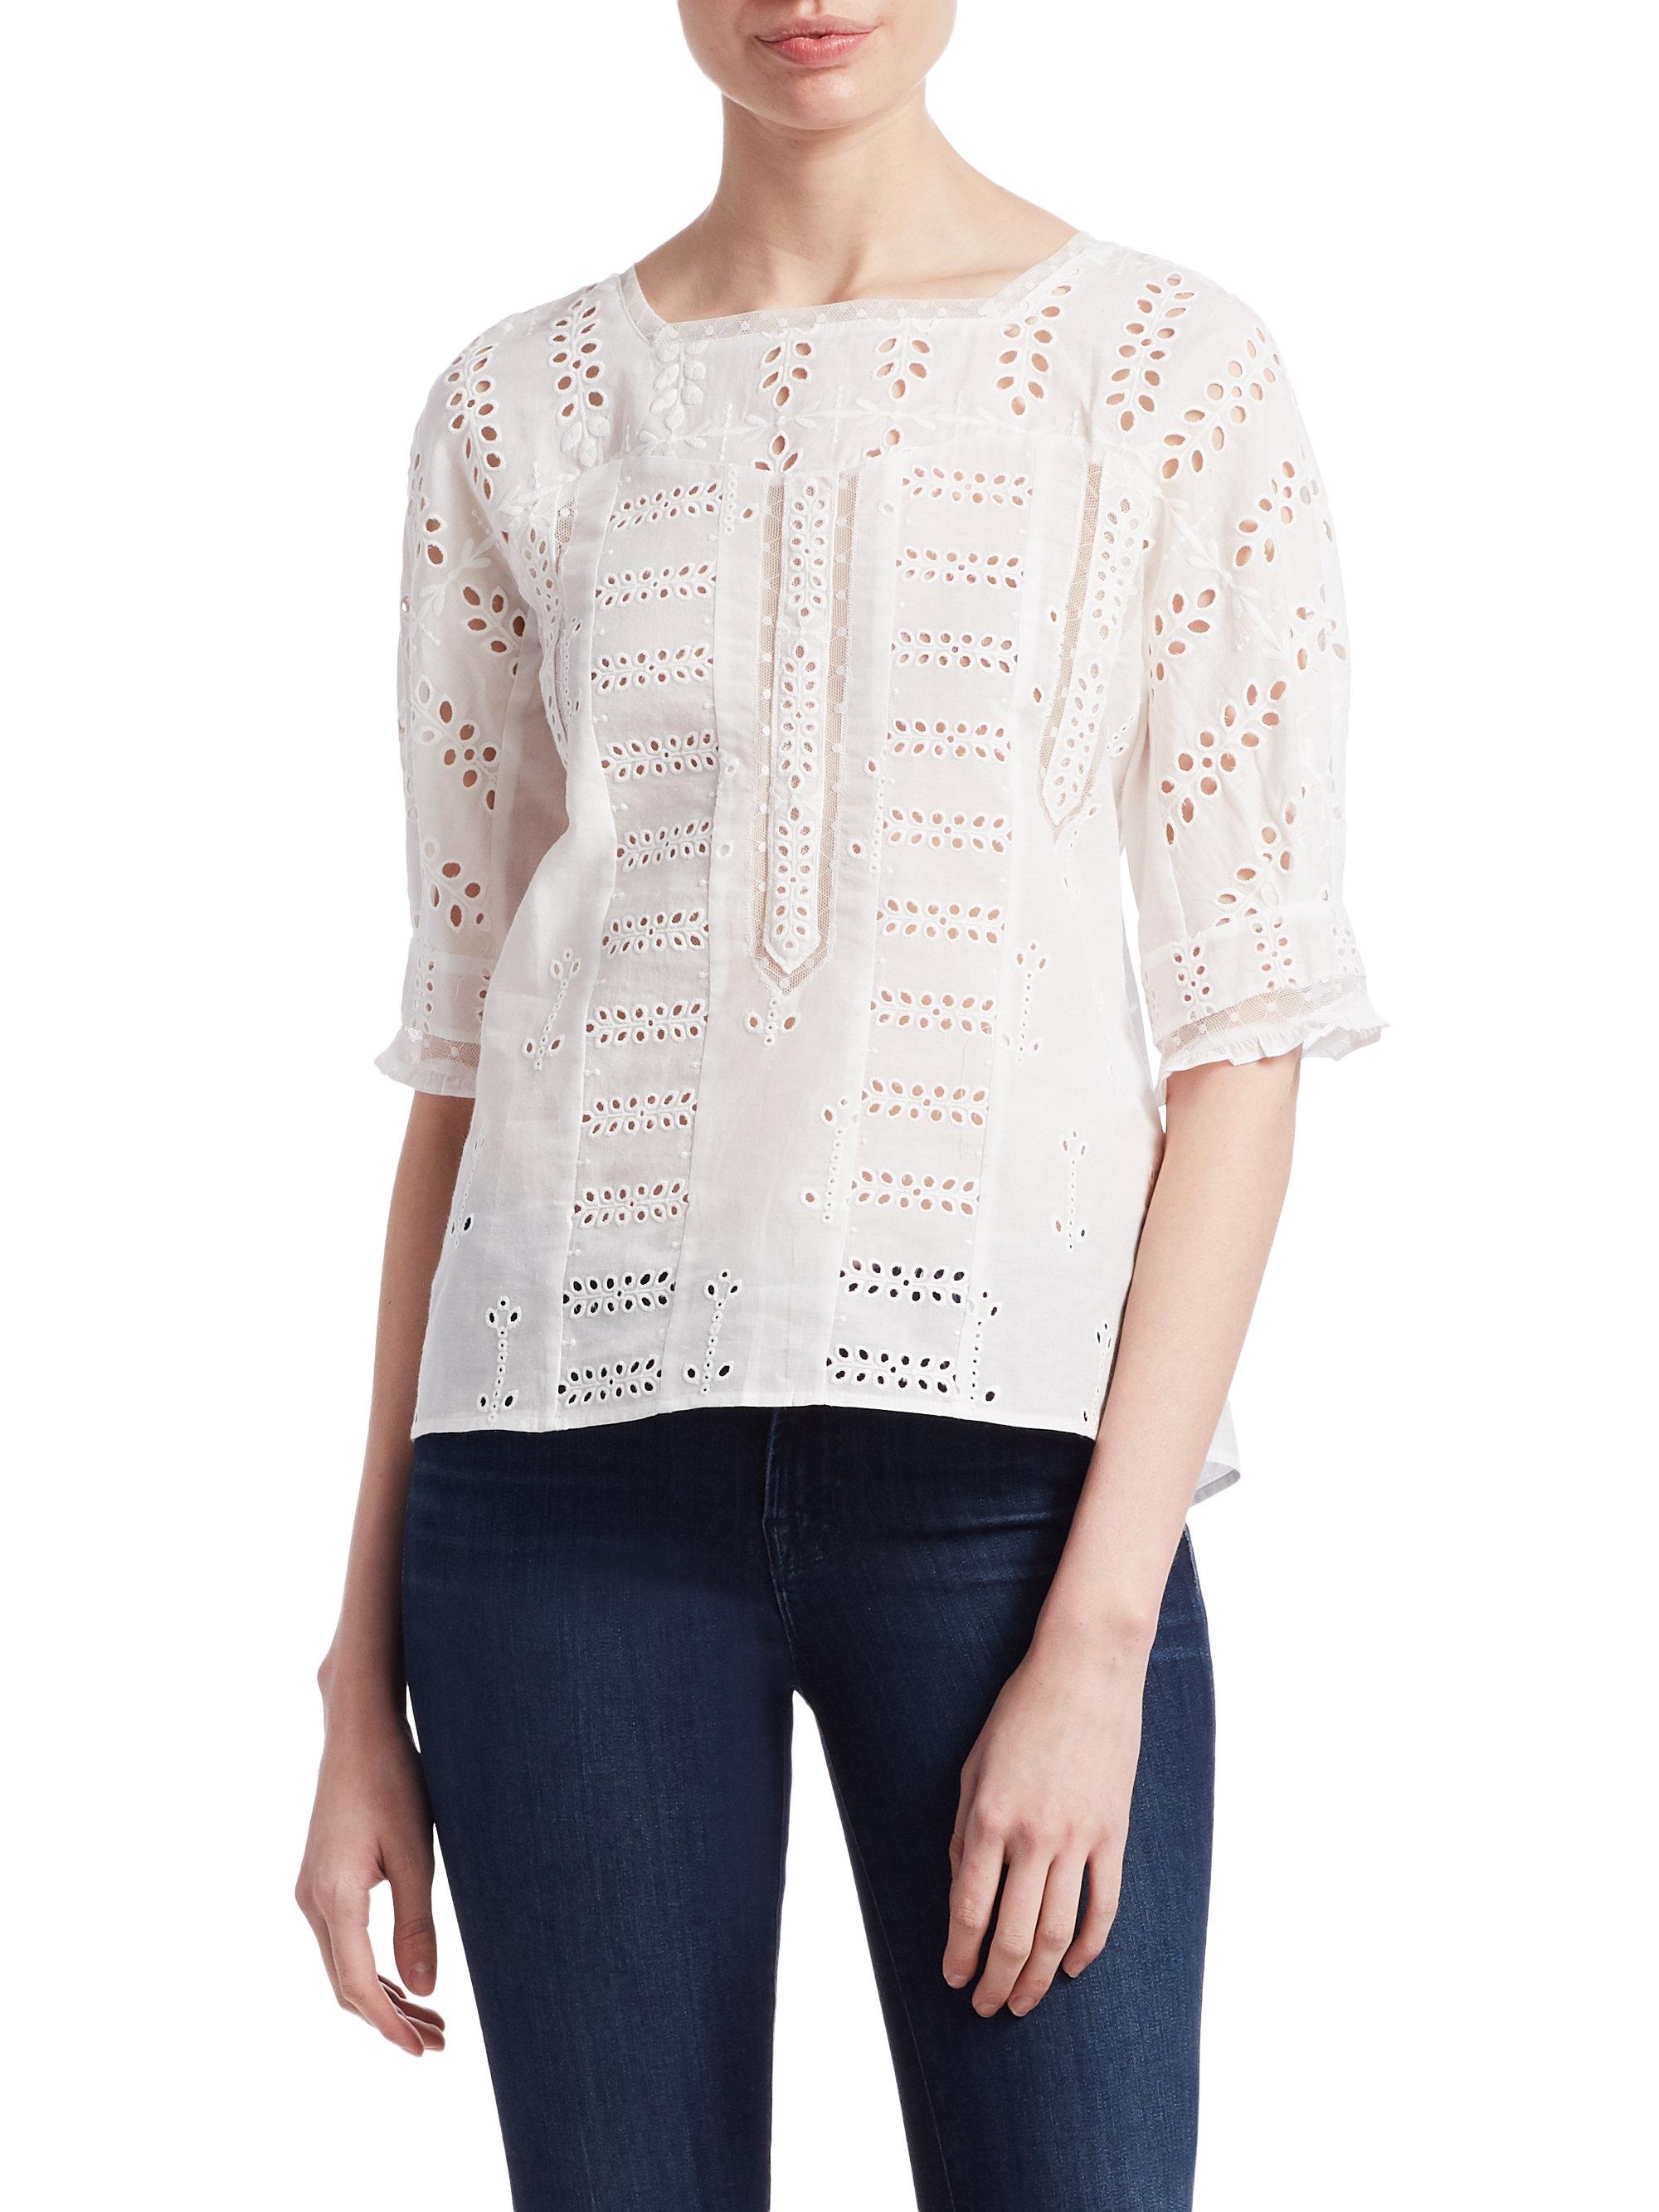 Maje Cotton Loody Eyelet Top in White | Lyst